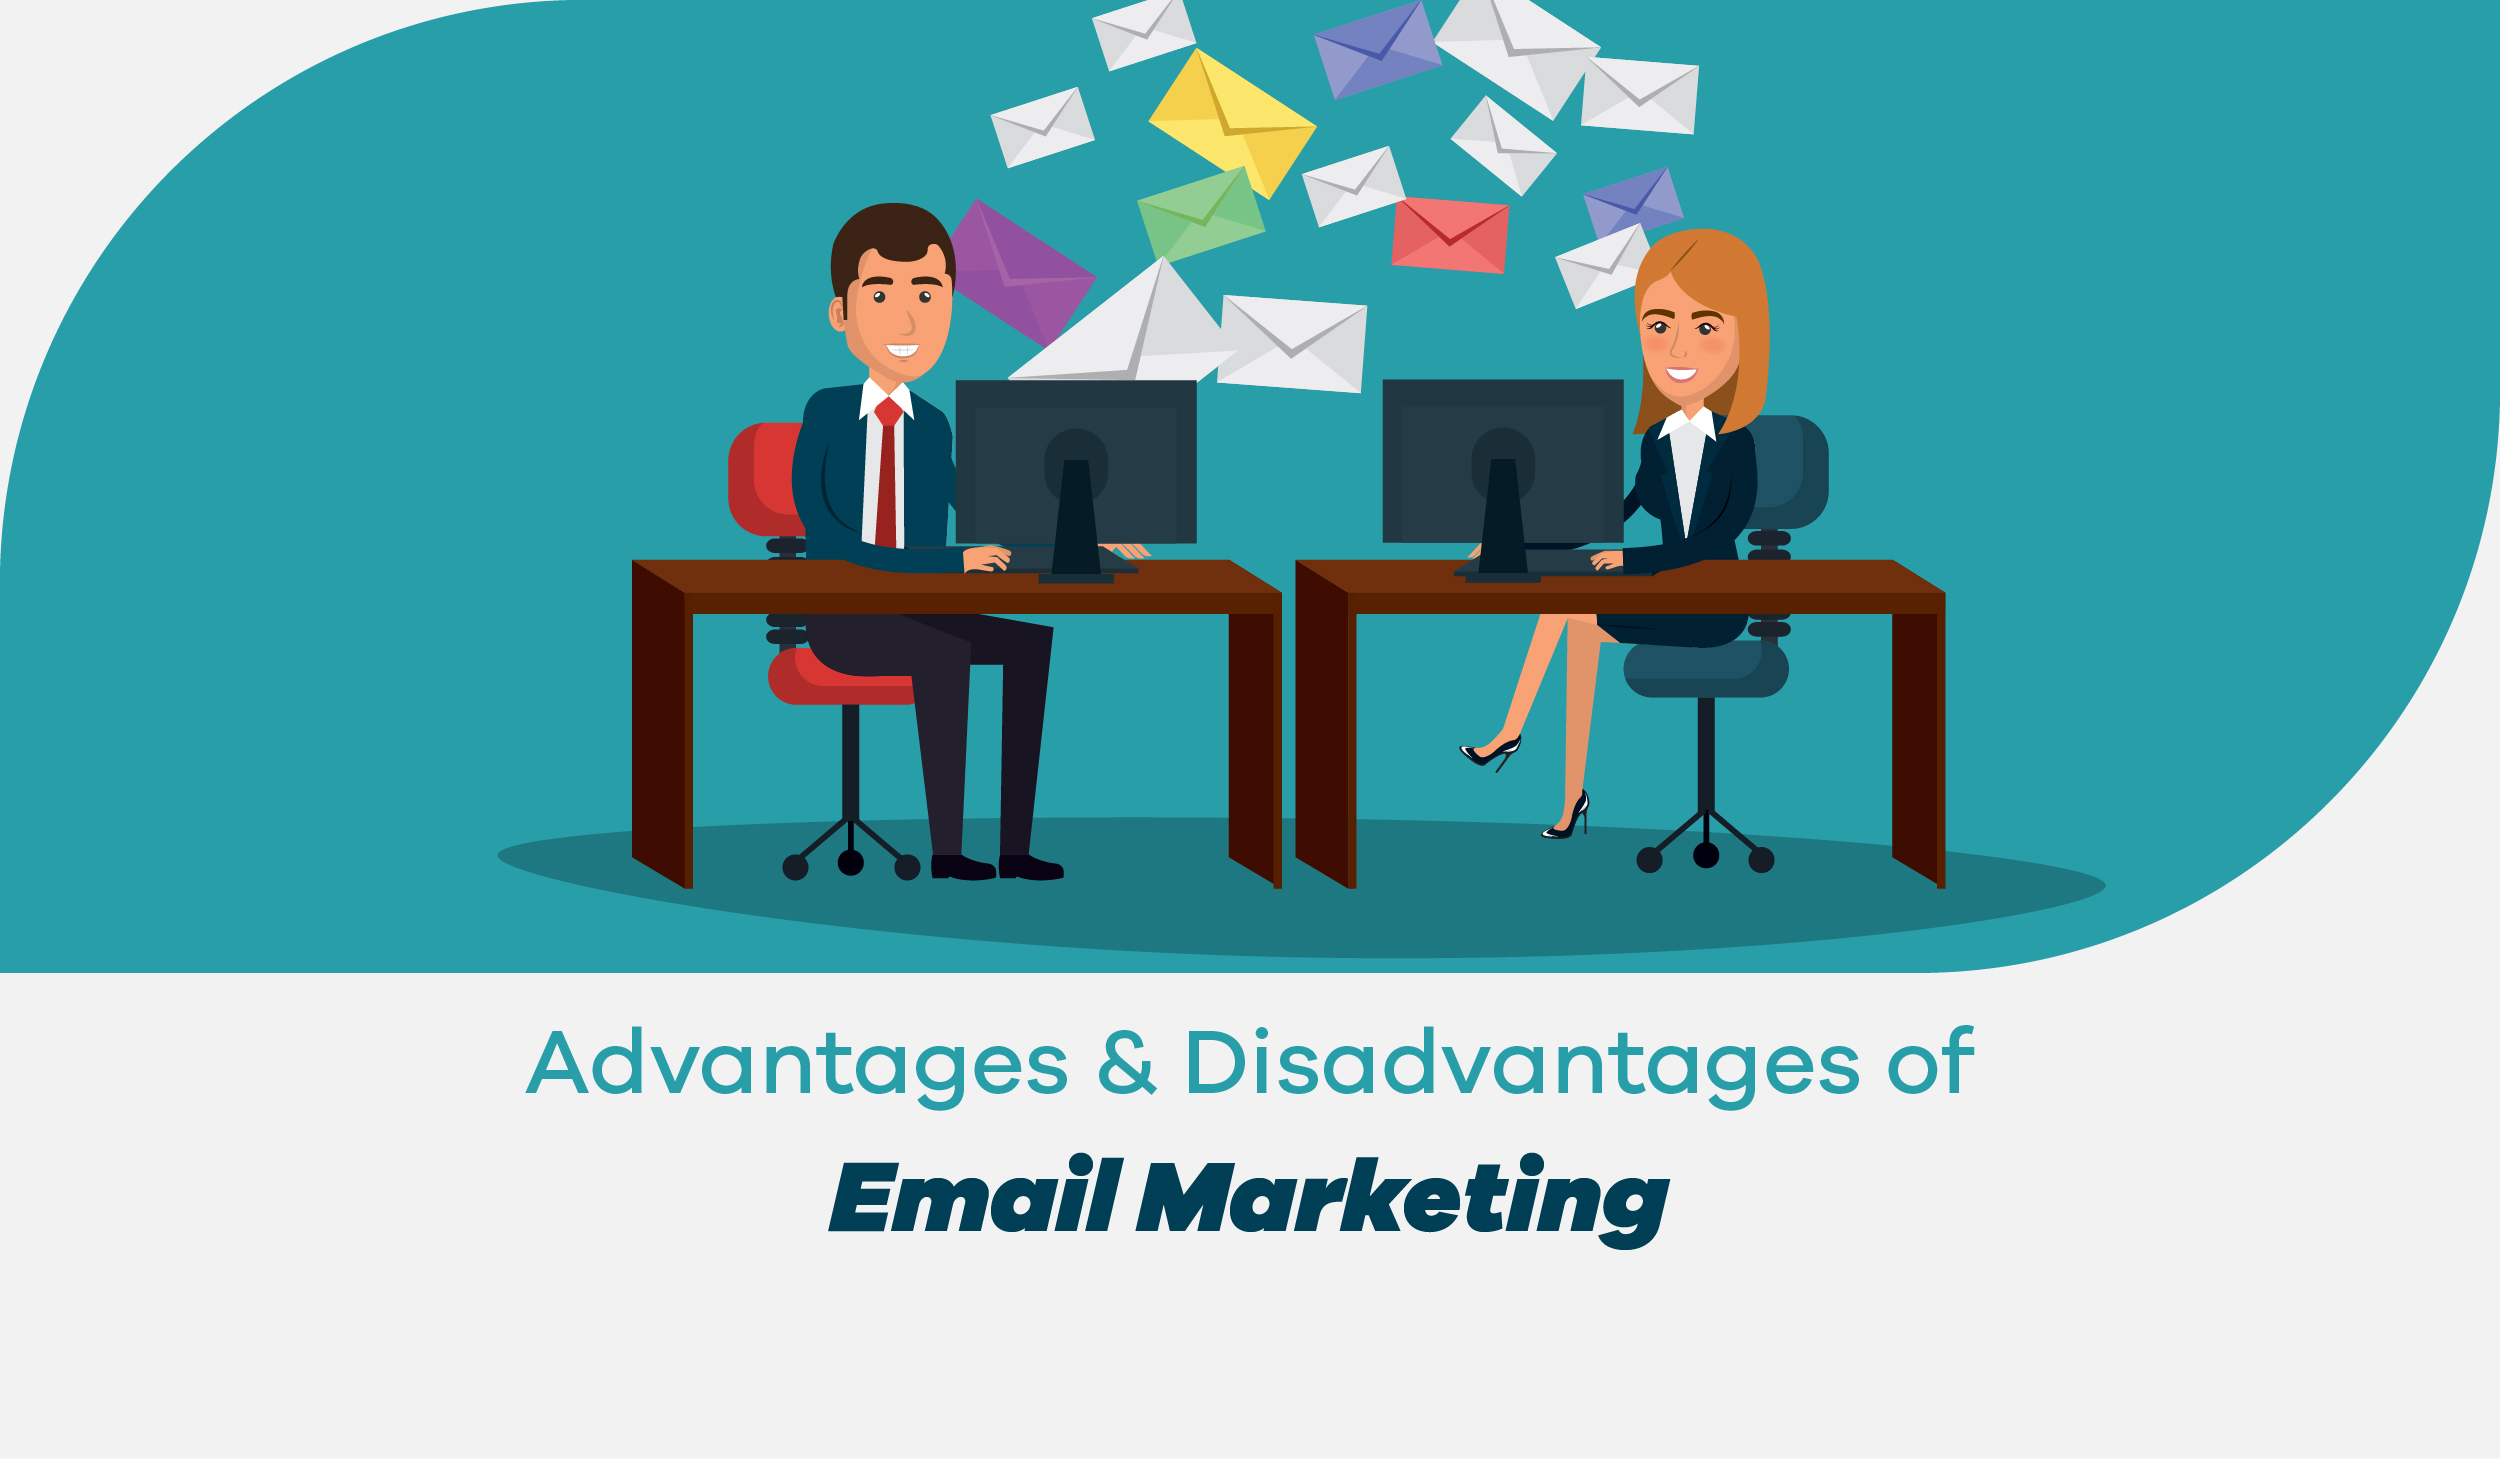 Advantages and disadvantages of email marketing